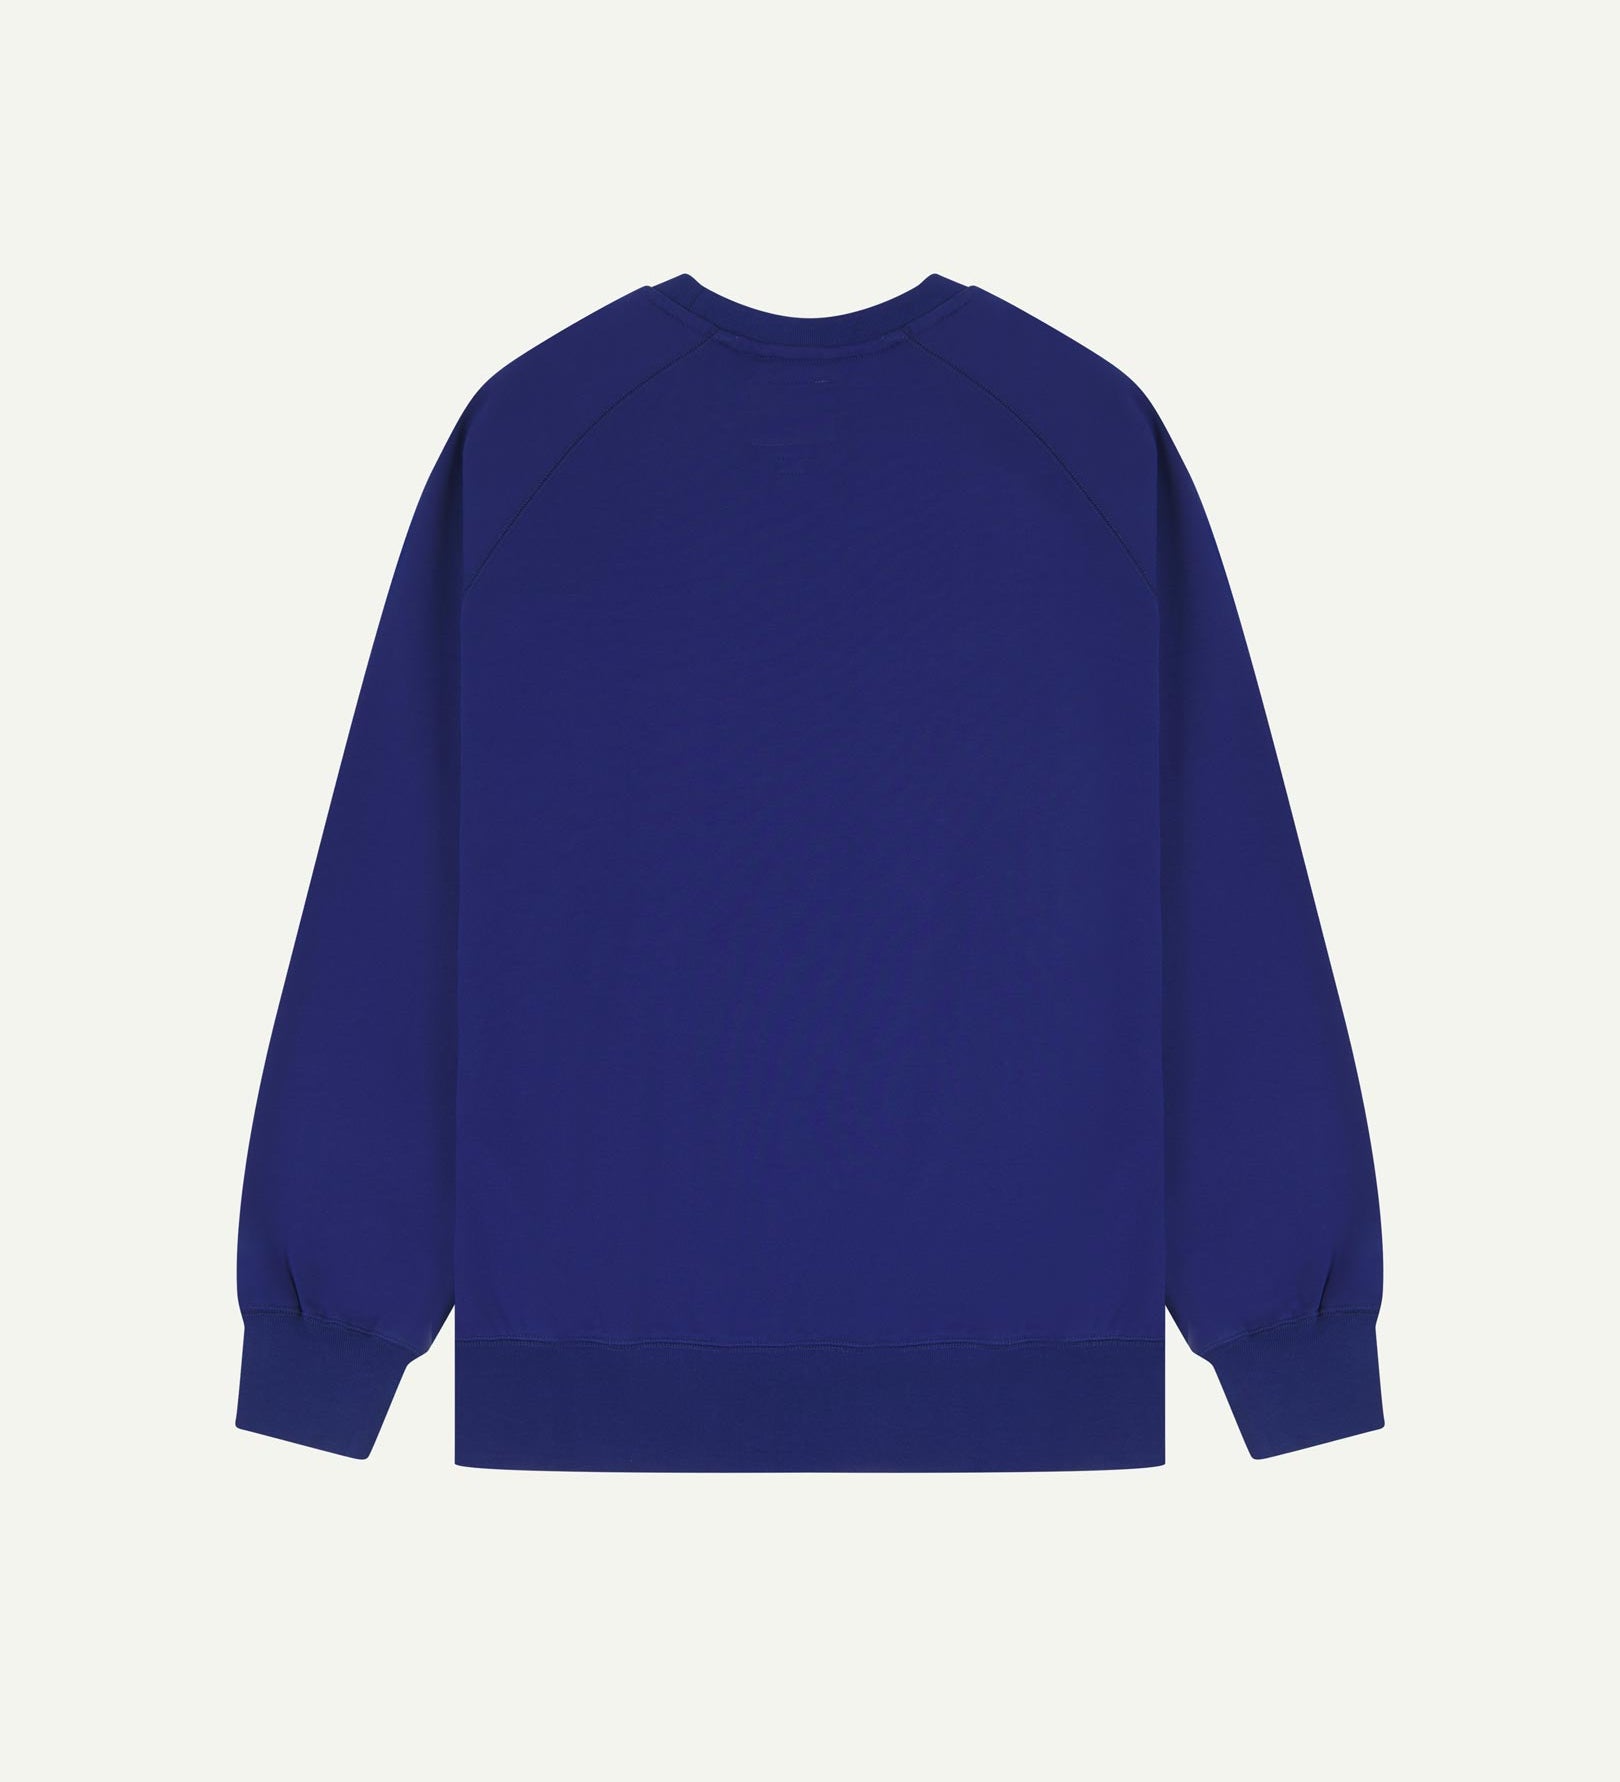 Back view of men's ultra-blue organic heavyweight cotton 7005 jersey sweatshirt by Uskees, showing ribbed cuffs and hem.